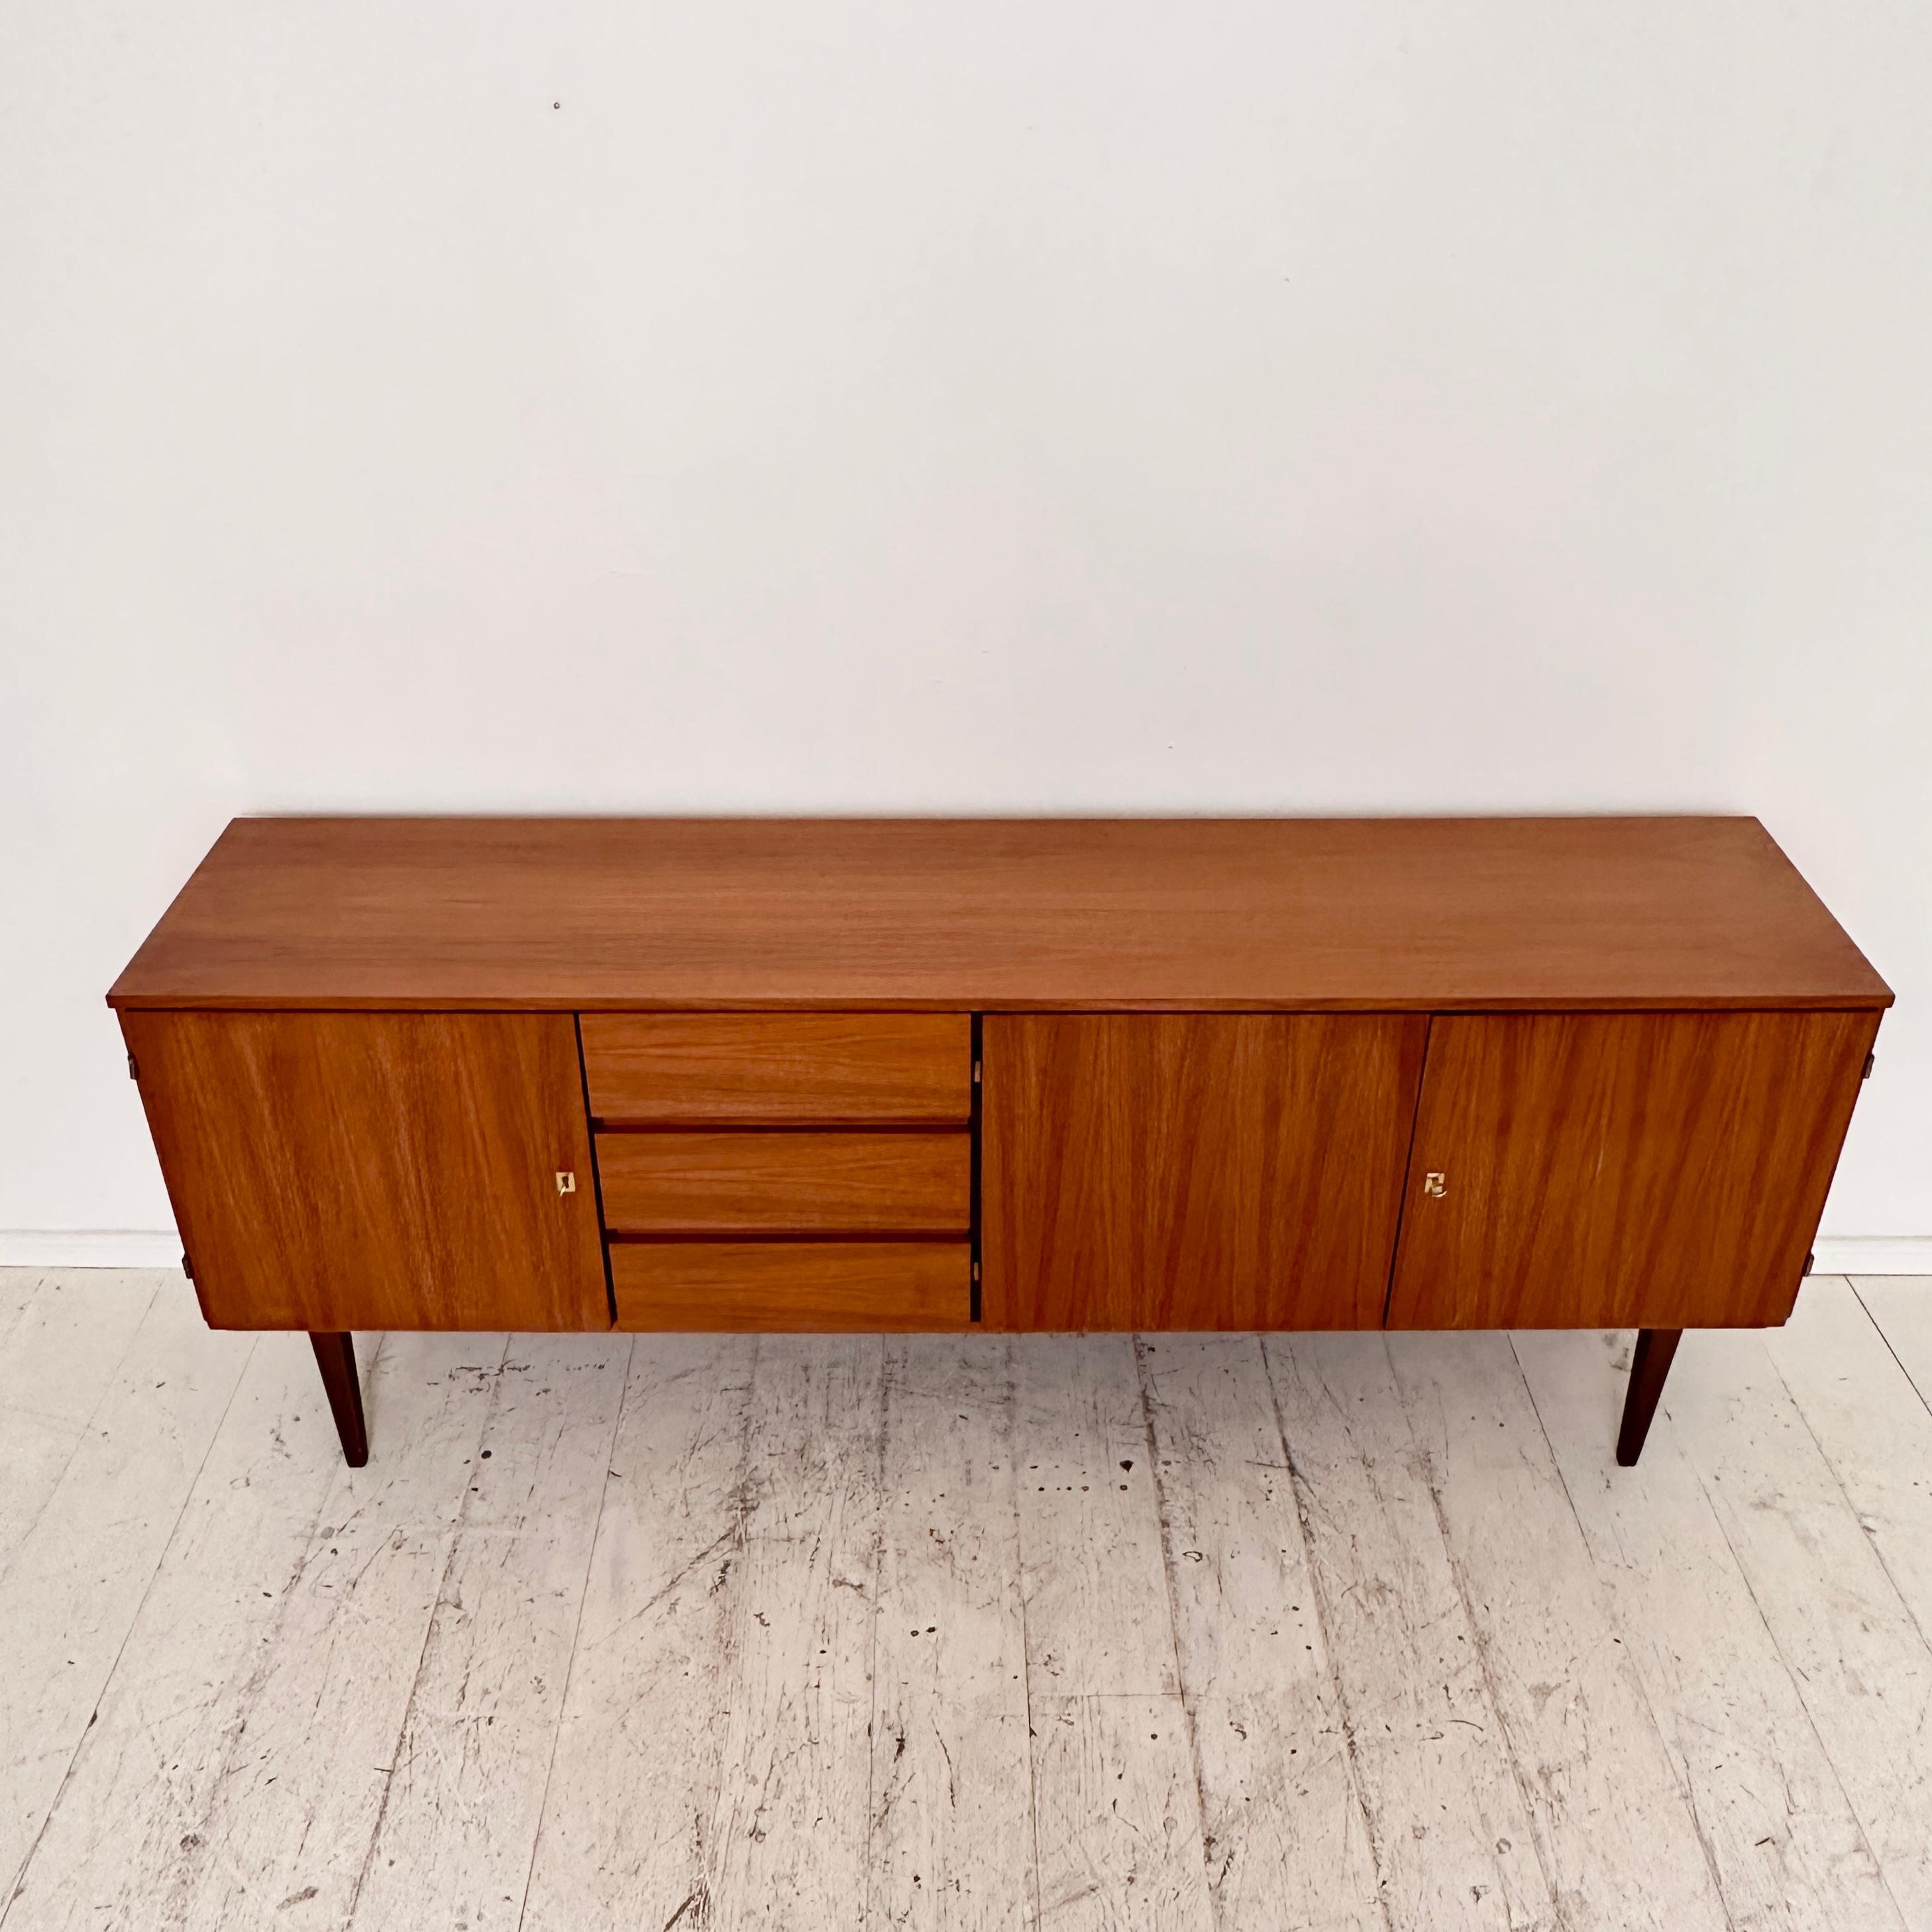 Mid-Century Modern Mid Century German Sideboard Brown Walnut with Drawers and Doors, around 1960